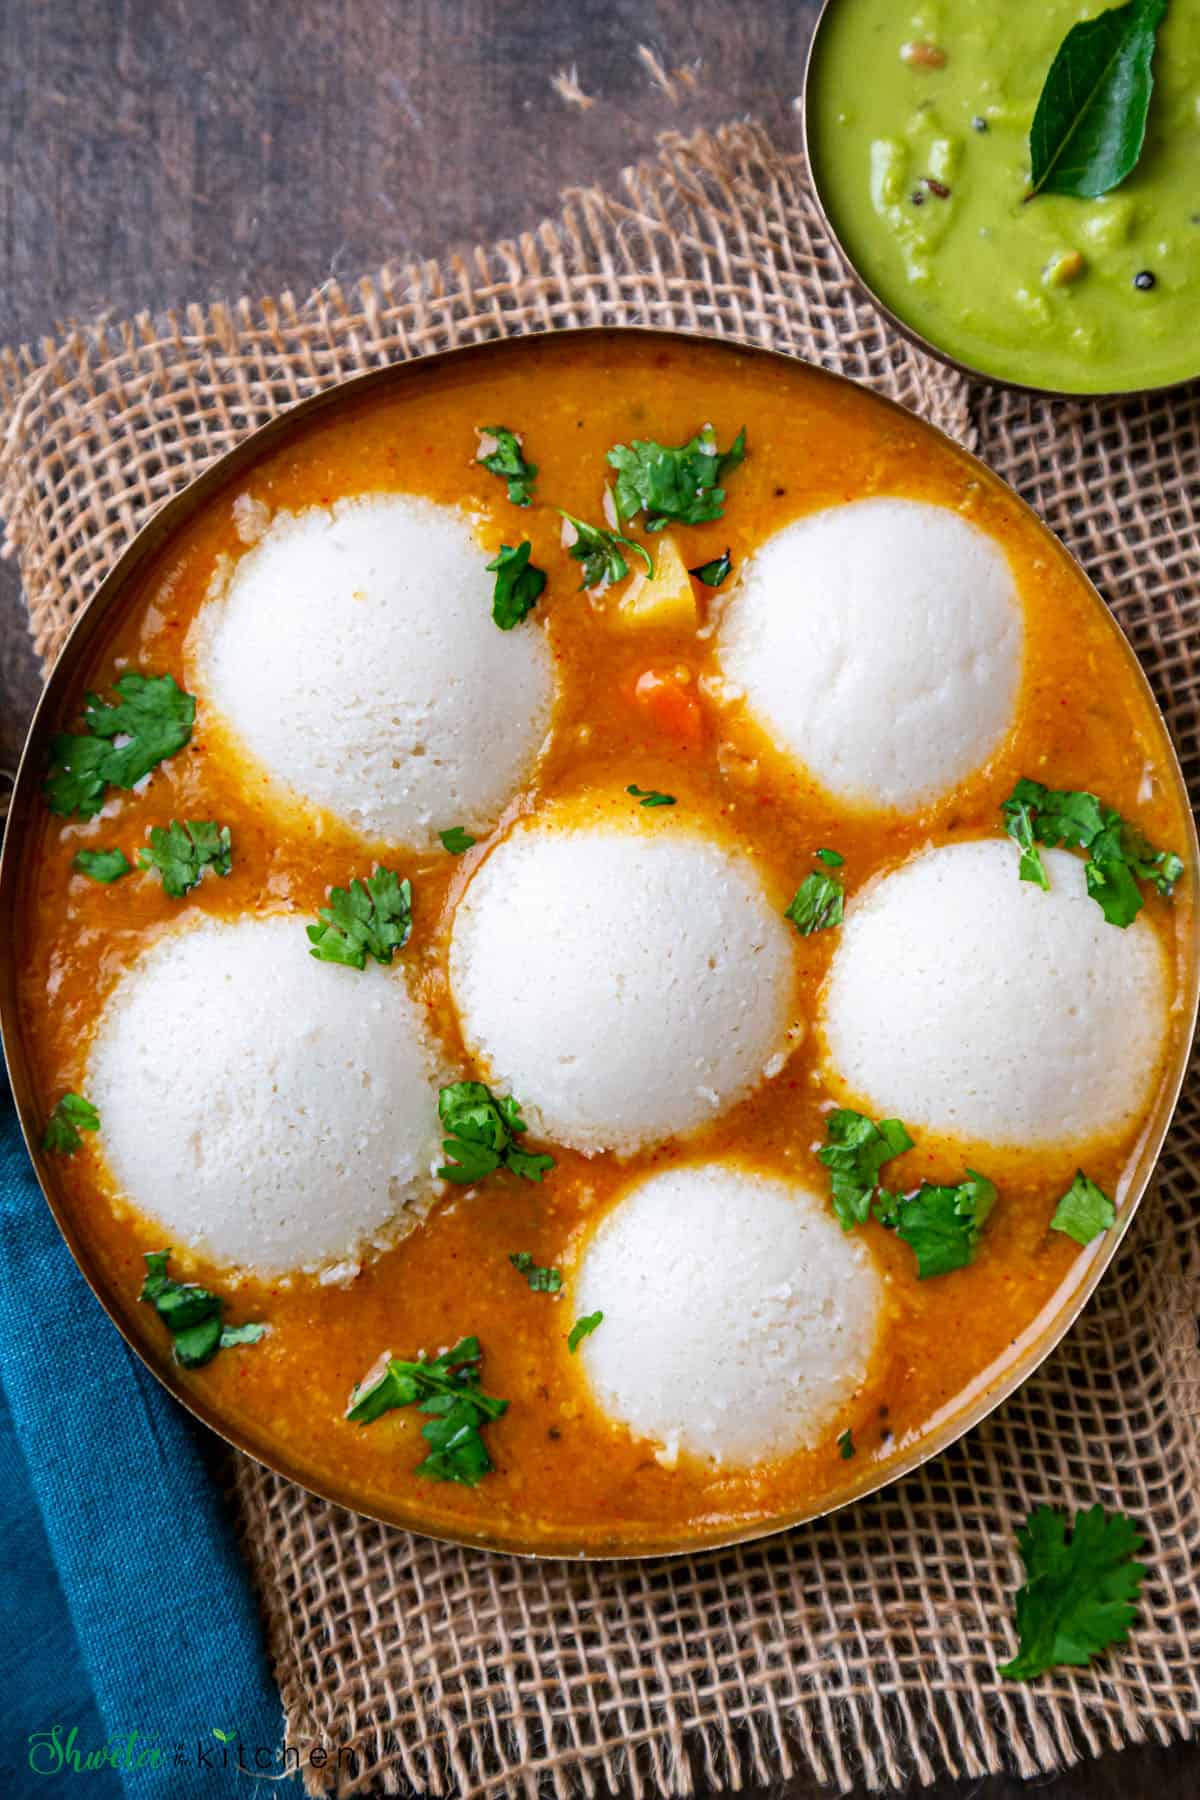 Bowl with 6 Idli dunked in sambar with chutney bowl on the side